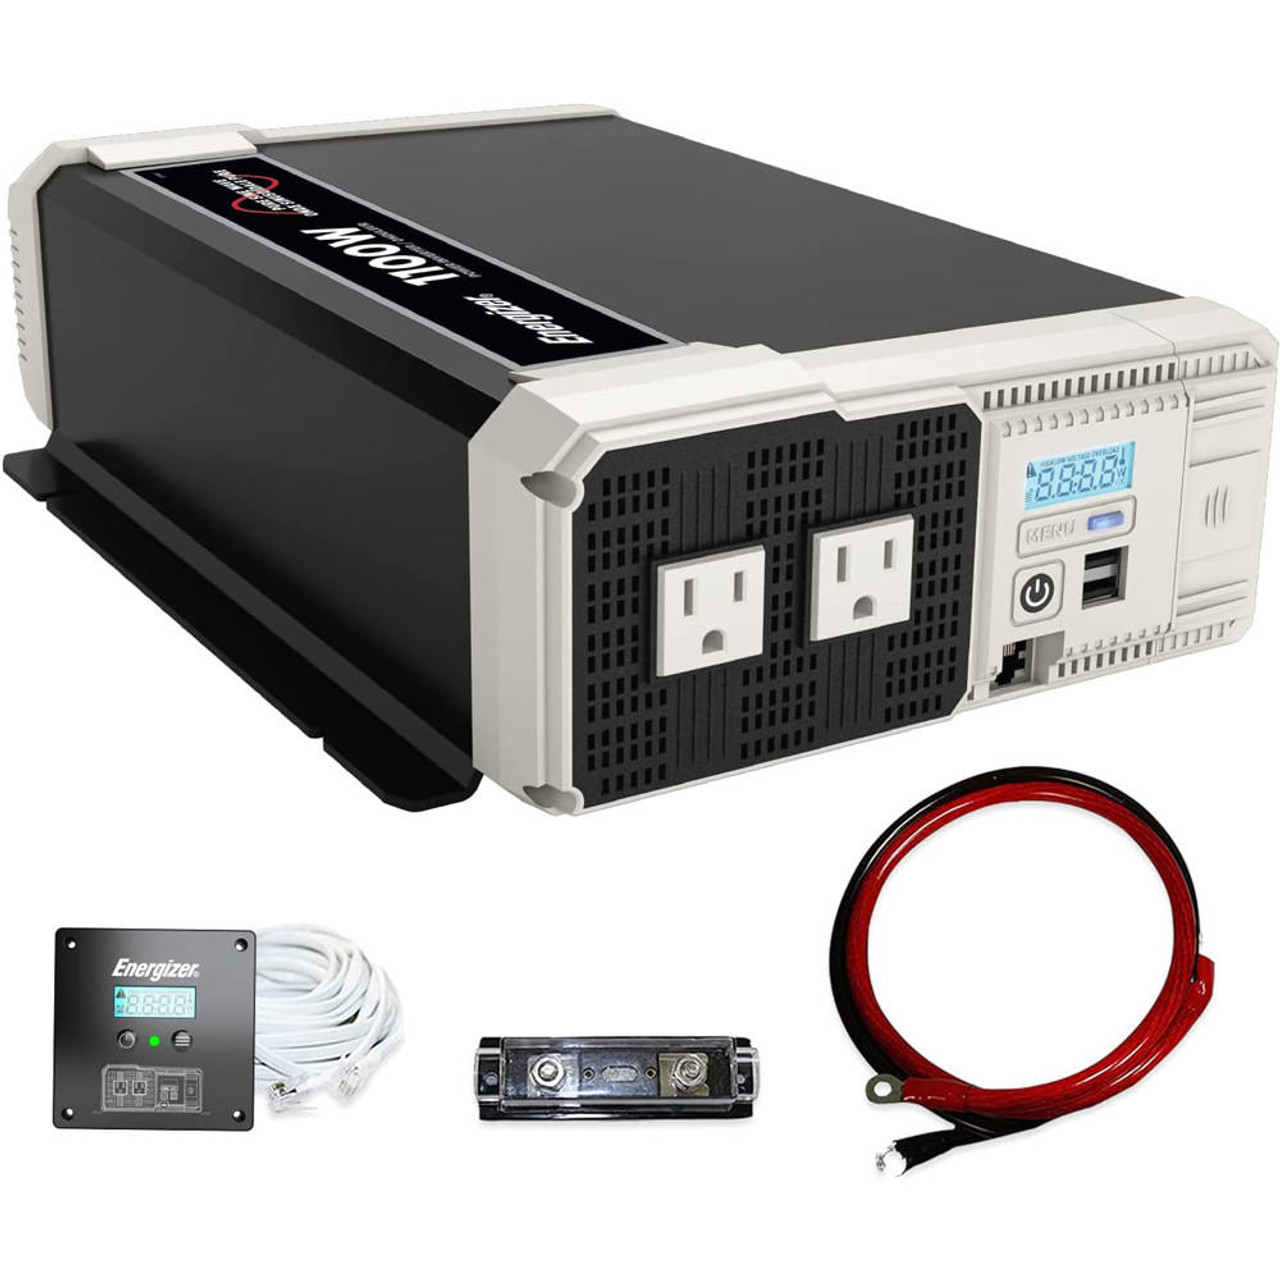 https://cdn11.bigcommerce.com/s-zgzol/images/stencil/1280x1280/products/71425/210442/energizer-ep1500-12v-dc-to-ac-pure-sine-wave-inverter-1500w__00179.1678395747.jpg?c=2